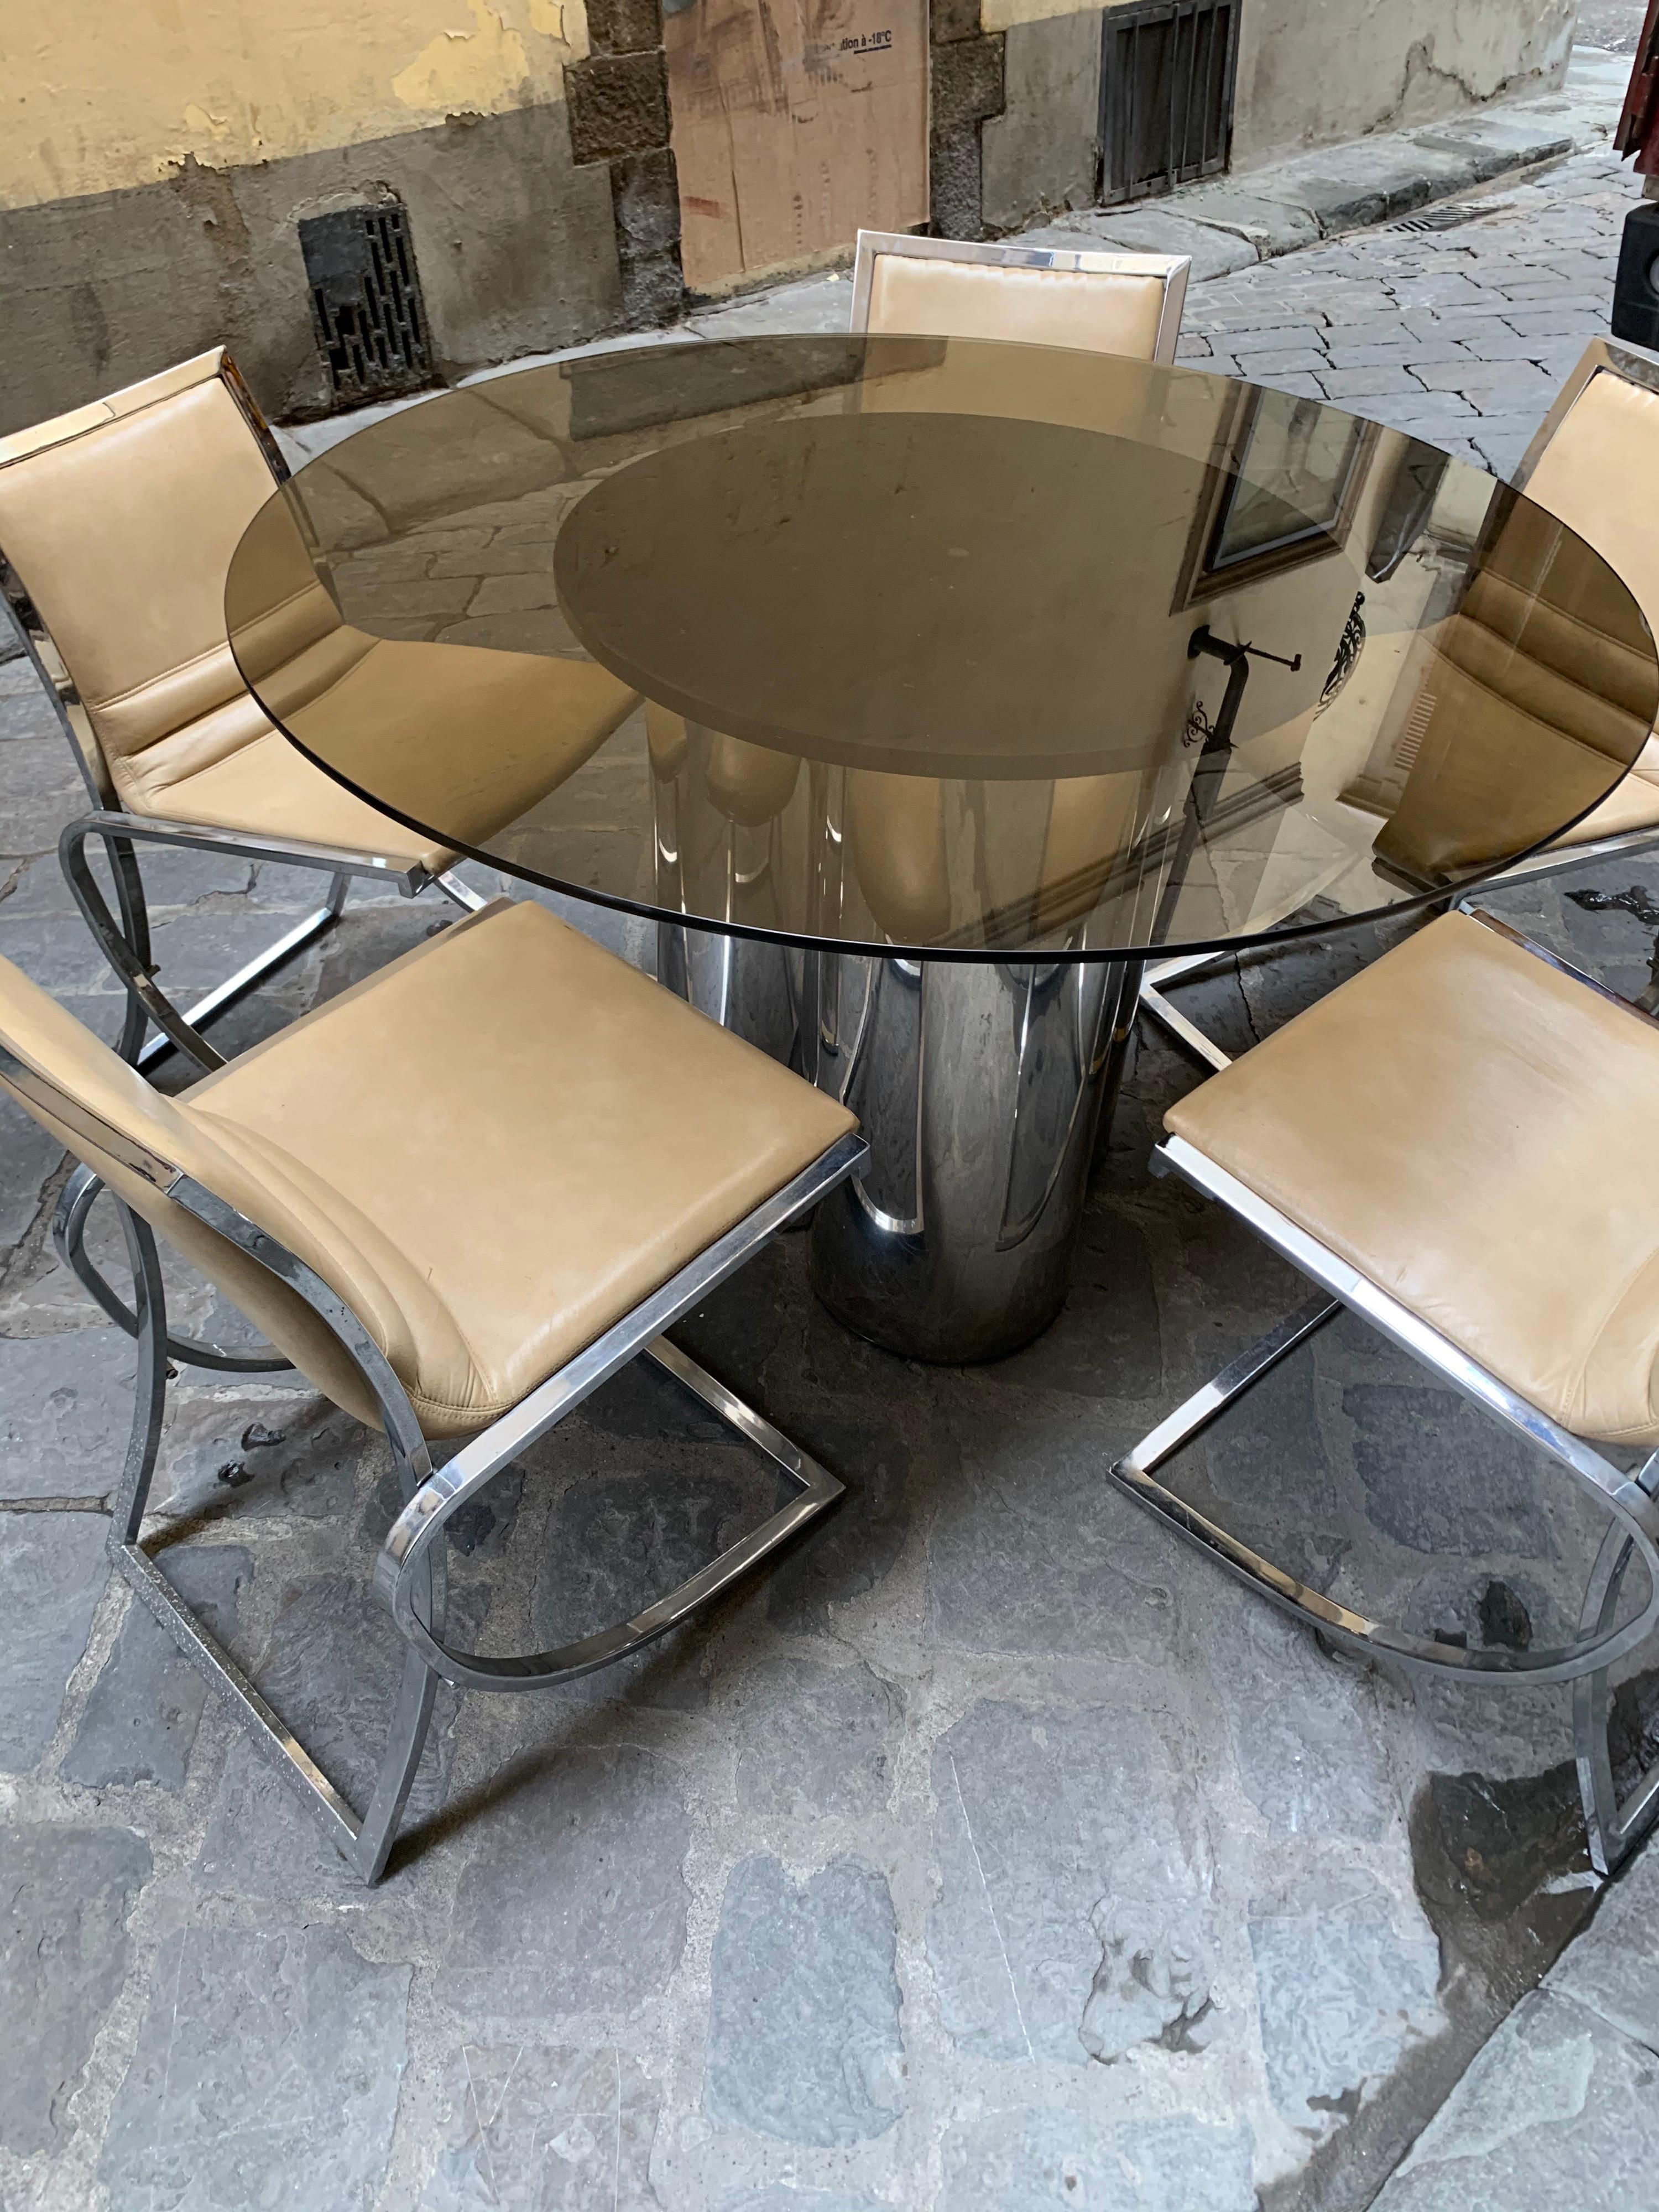 Vintage Italian round dining table, with a glass fume top on a trefoil chromed base and set of five chairs, champagne eco-leather, chromed fittings.
Perfect vintage condition.
Table and chairs can be sold individually.
Measurements of the chair: cm